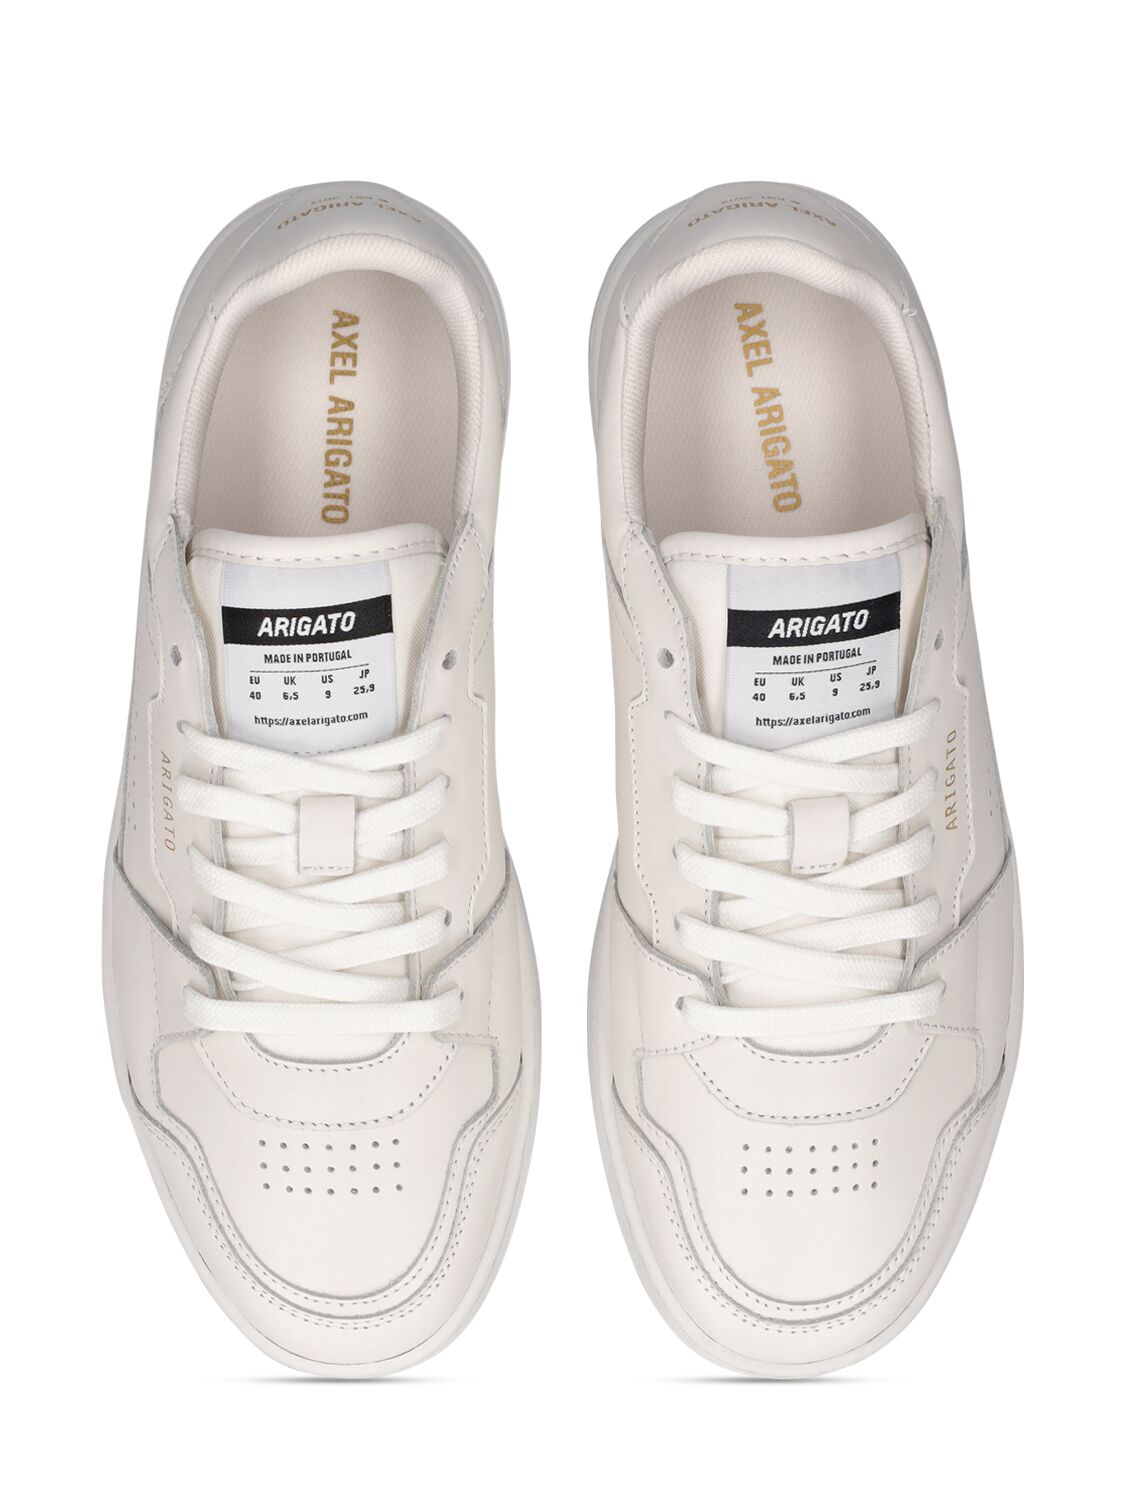 Shop Axel Arigato Dice Low Sneakers In White